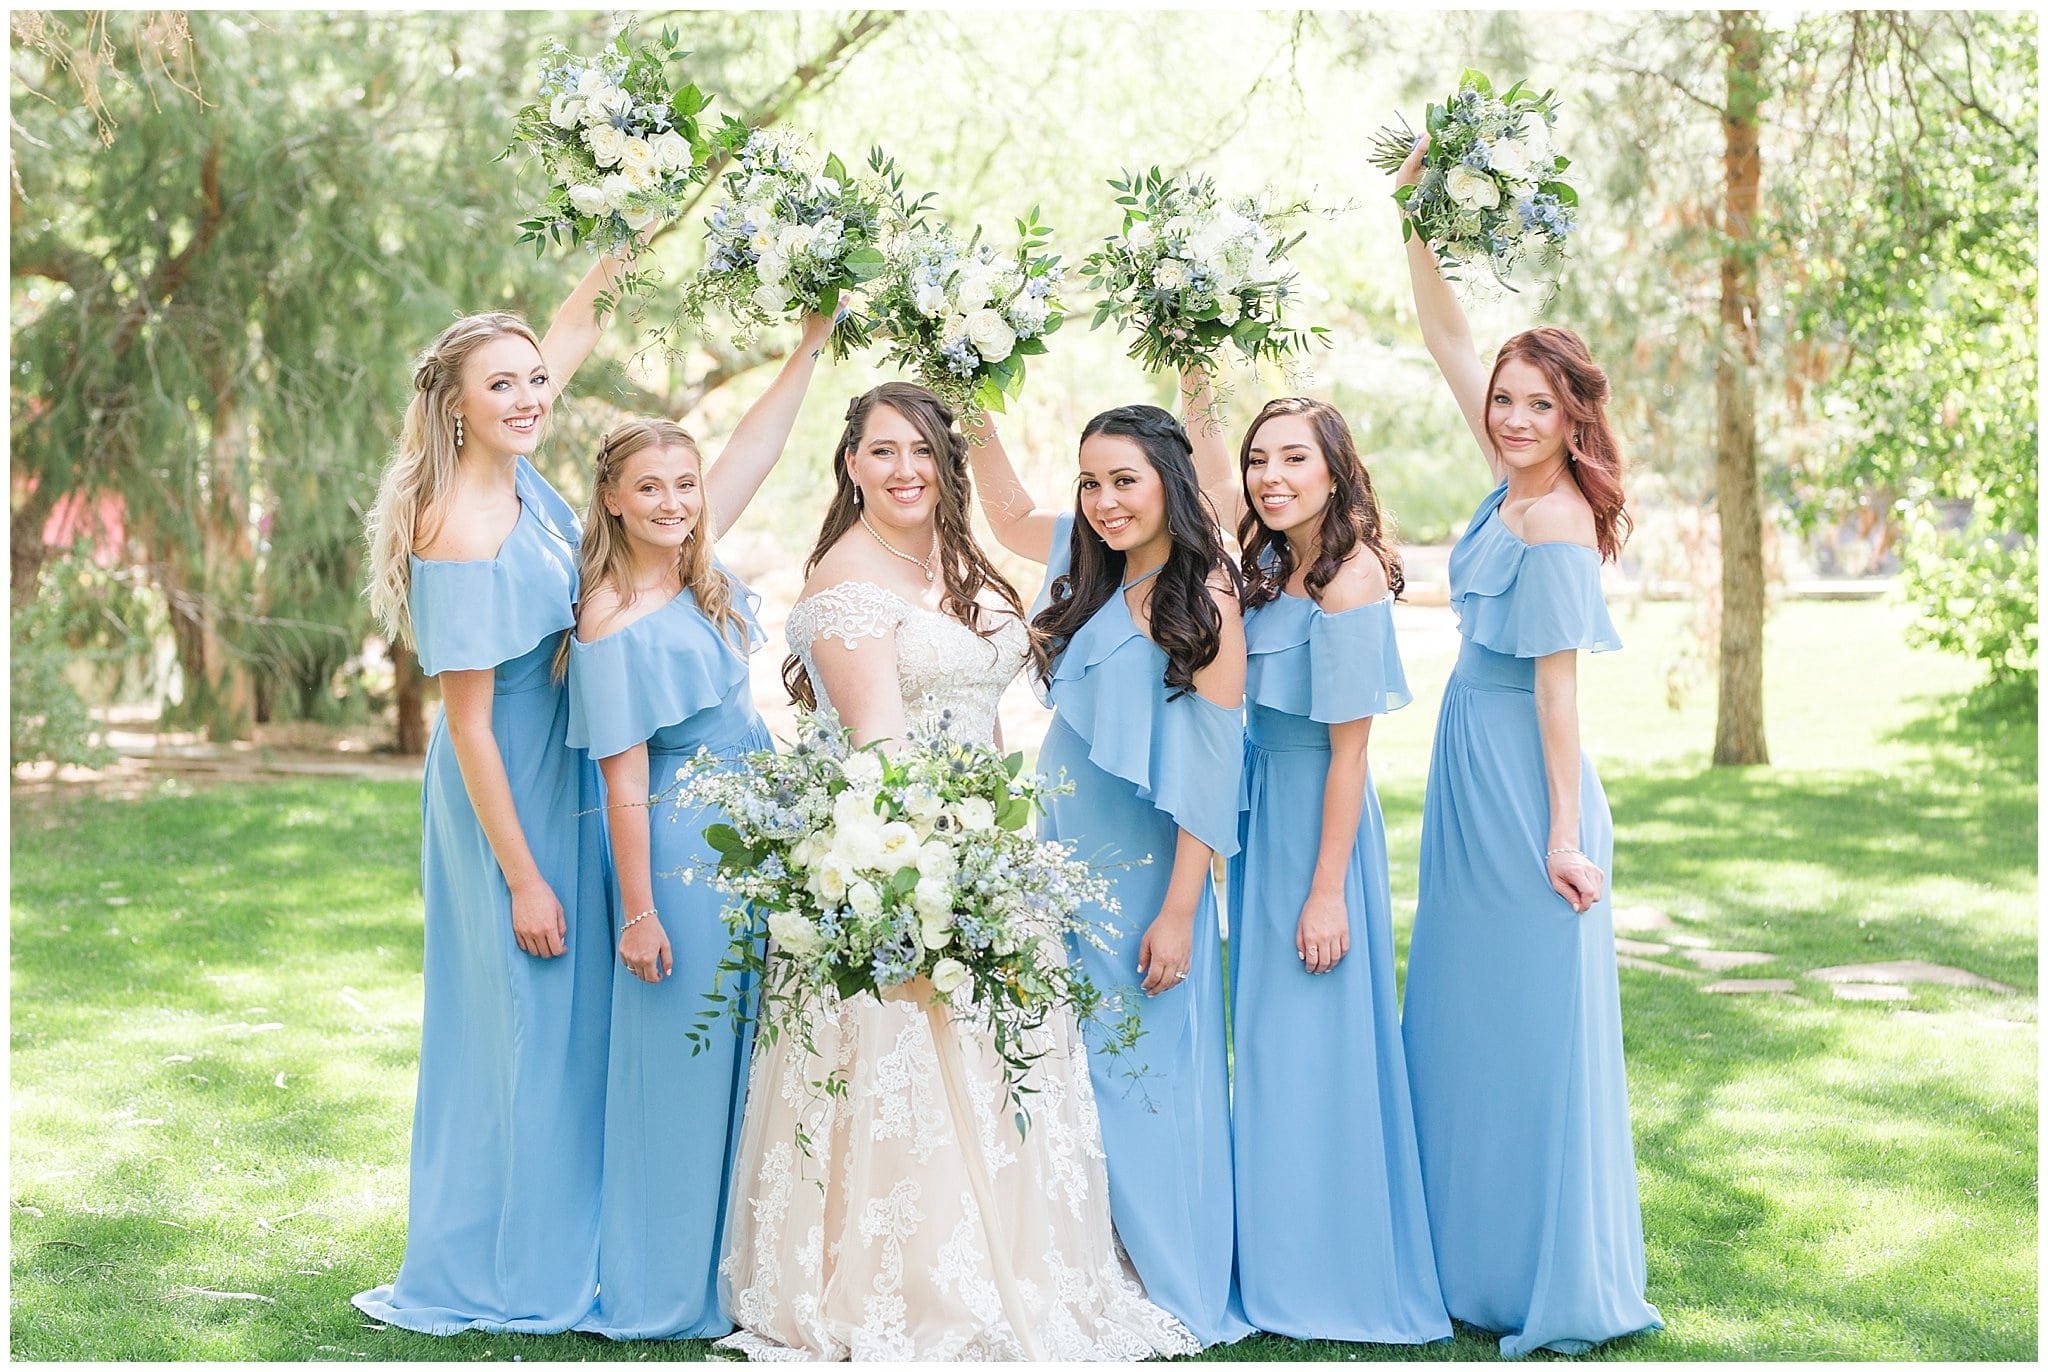 Windmill Winery Twisted Tree Ceremony Location | Bridesmaid Pictures